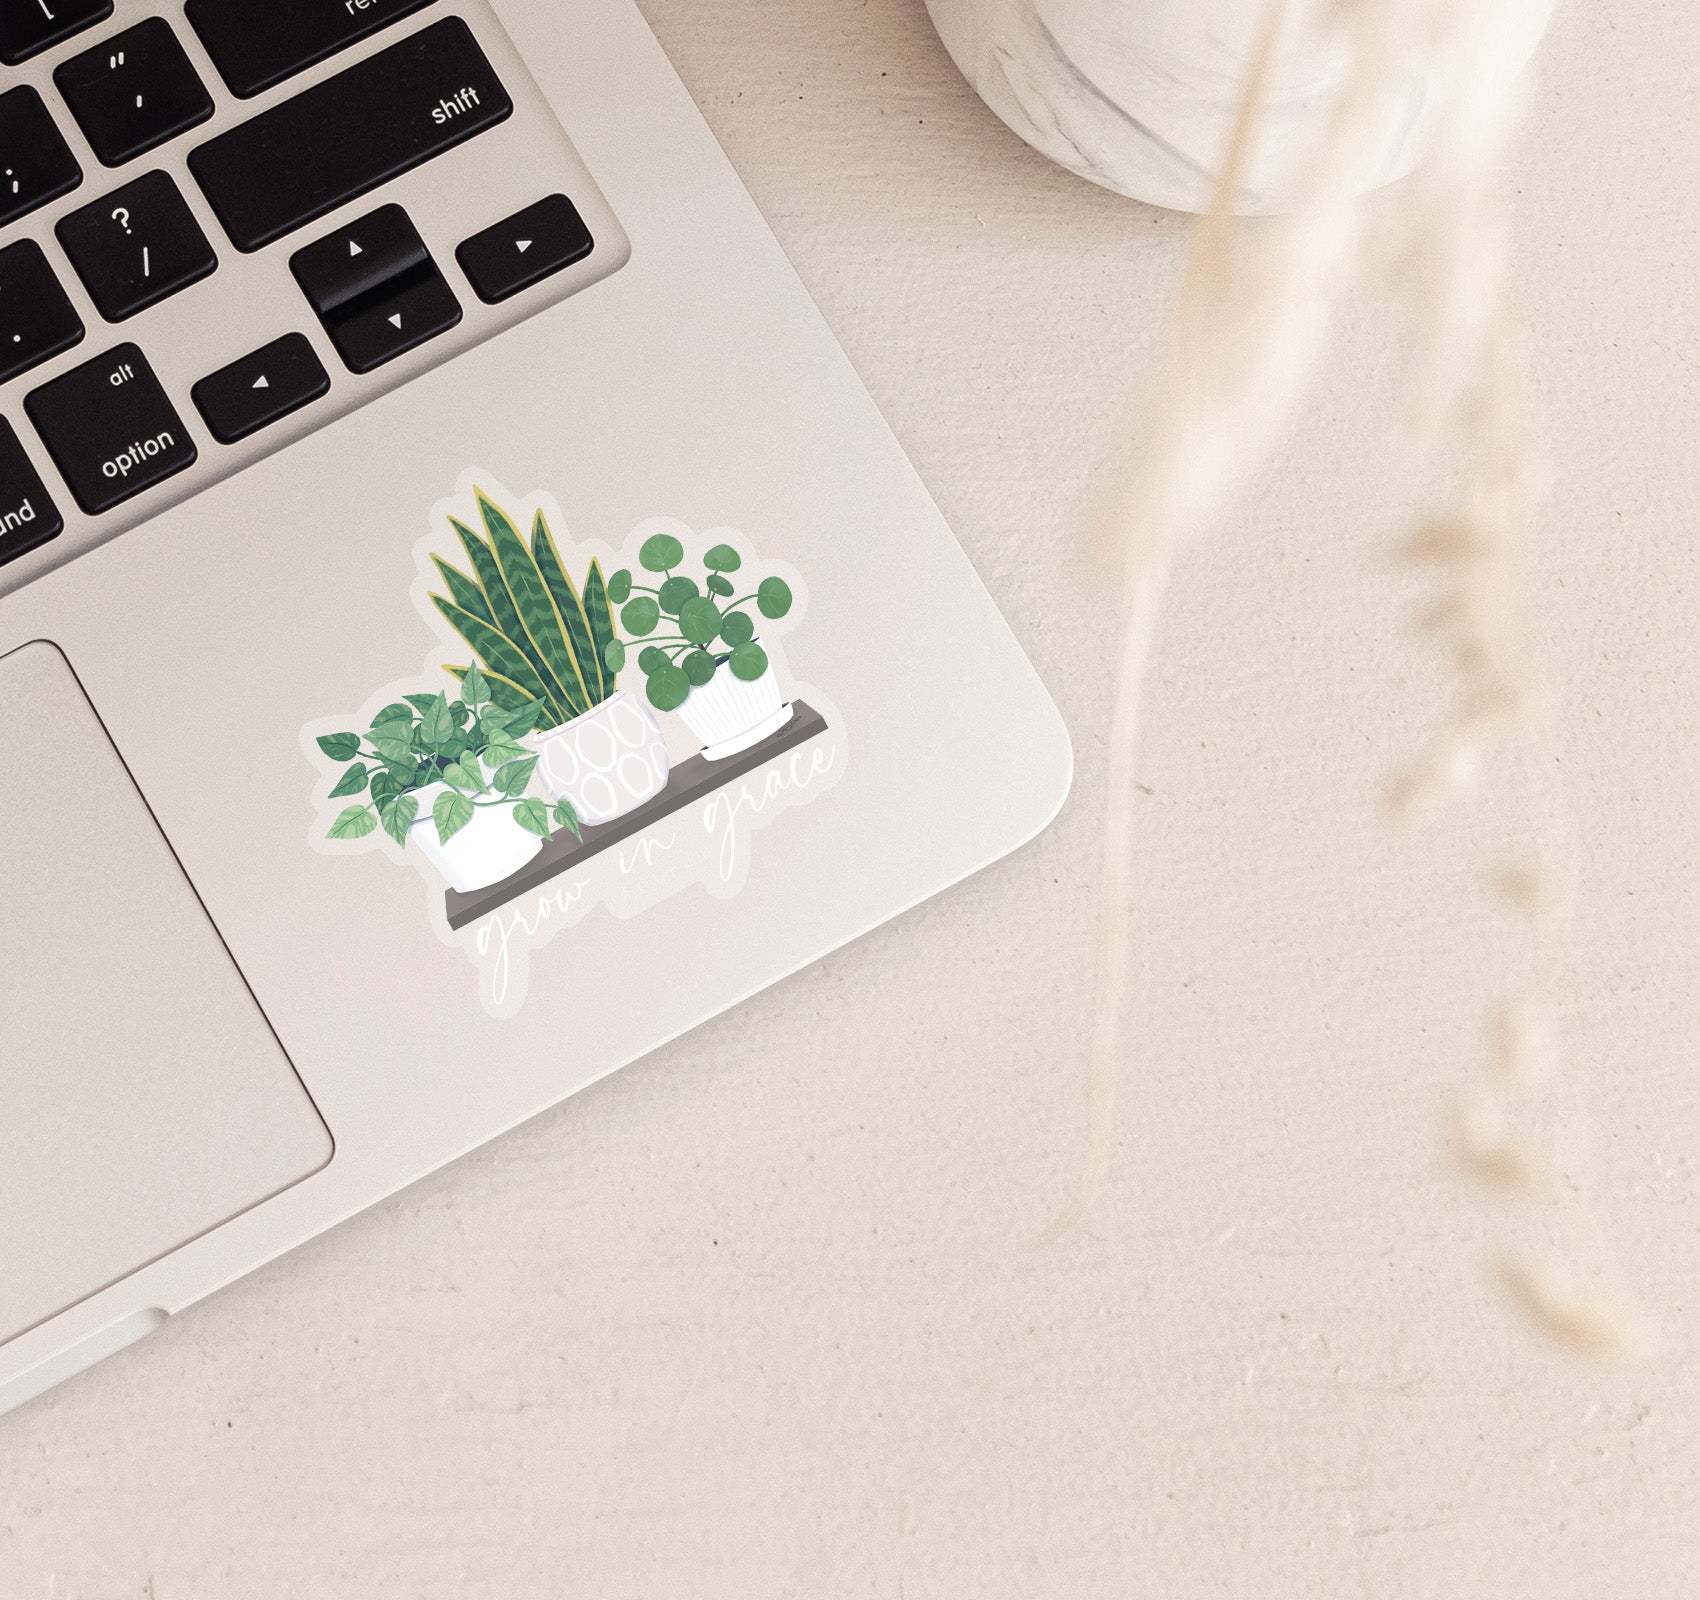 Grow in grace, 2 Peter 3:18 Bible verse Christian laptop sticker with a shelf of houseplants. These plants include a pothos plant, snake plant, and pilea peperomioides